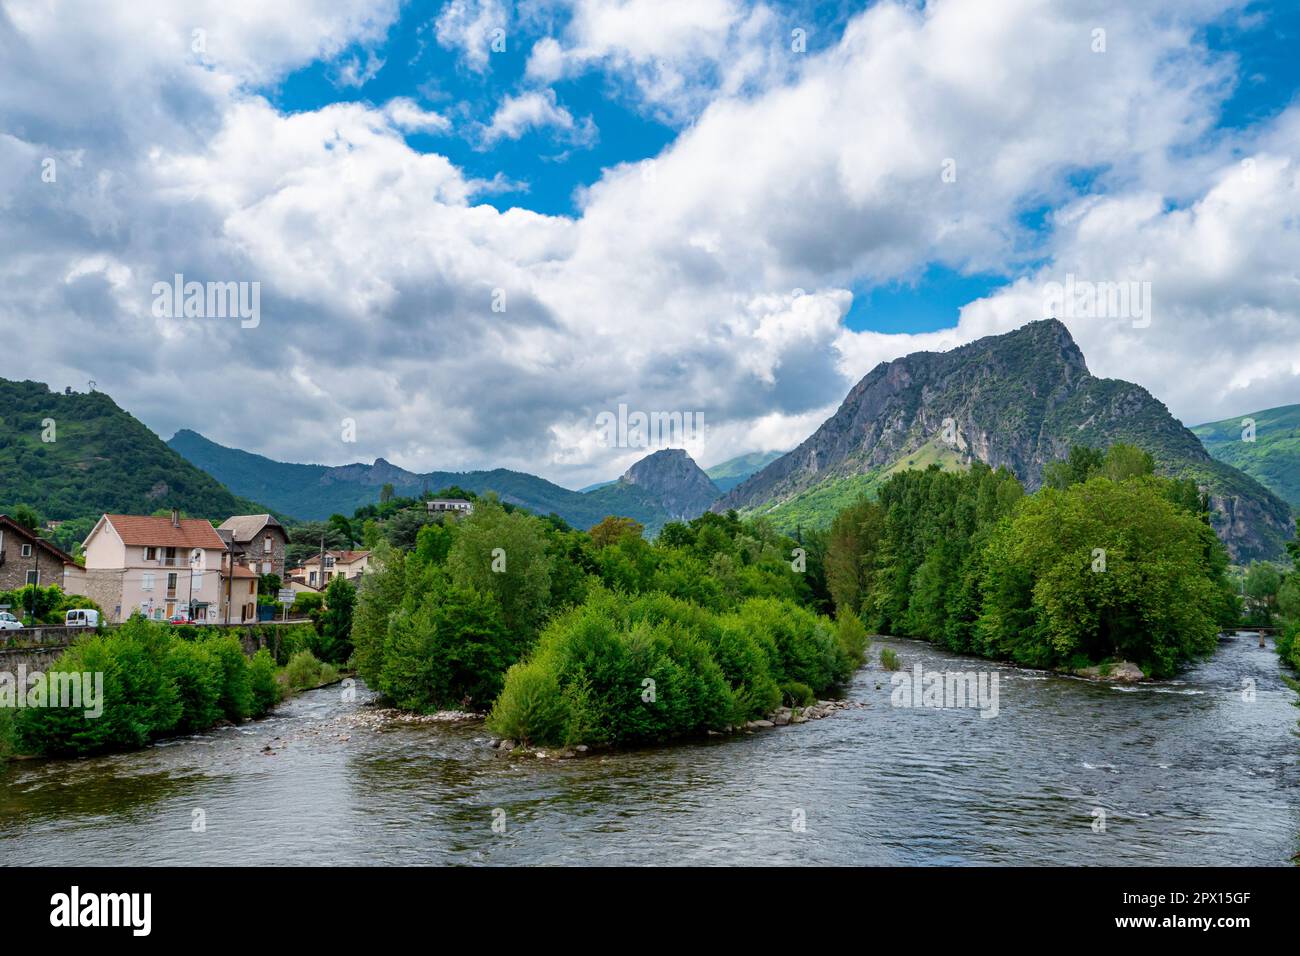 view of Overview of river and countryside, Tarascon-sur-Ariege, Ariege, Midi-Pyrenees, Stock Photo